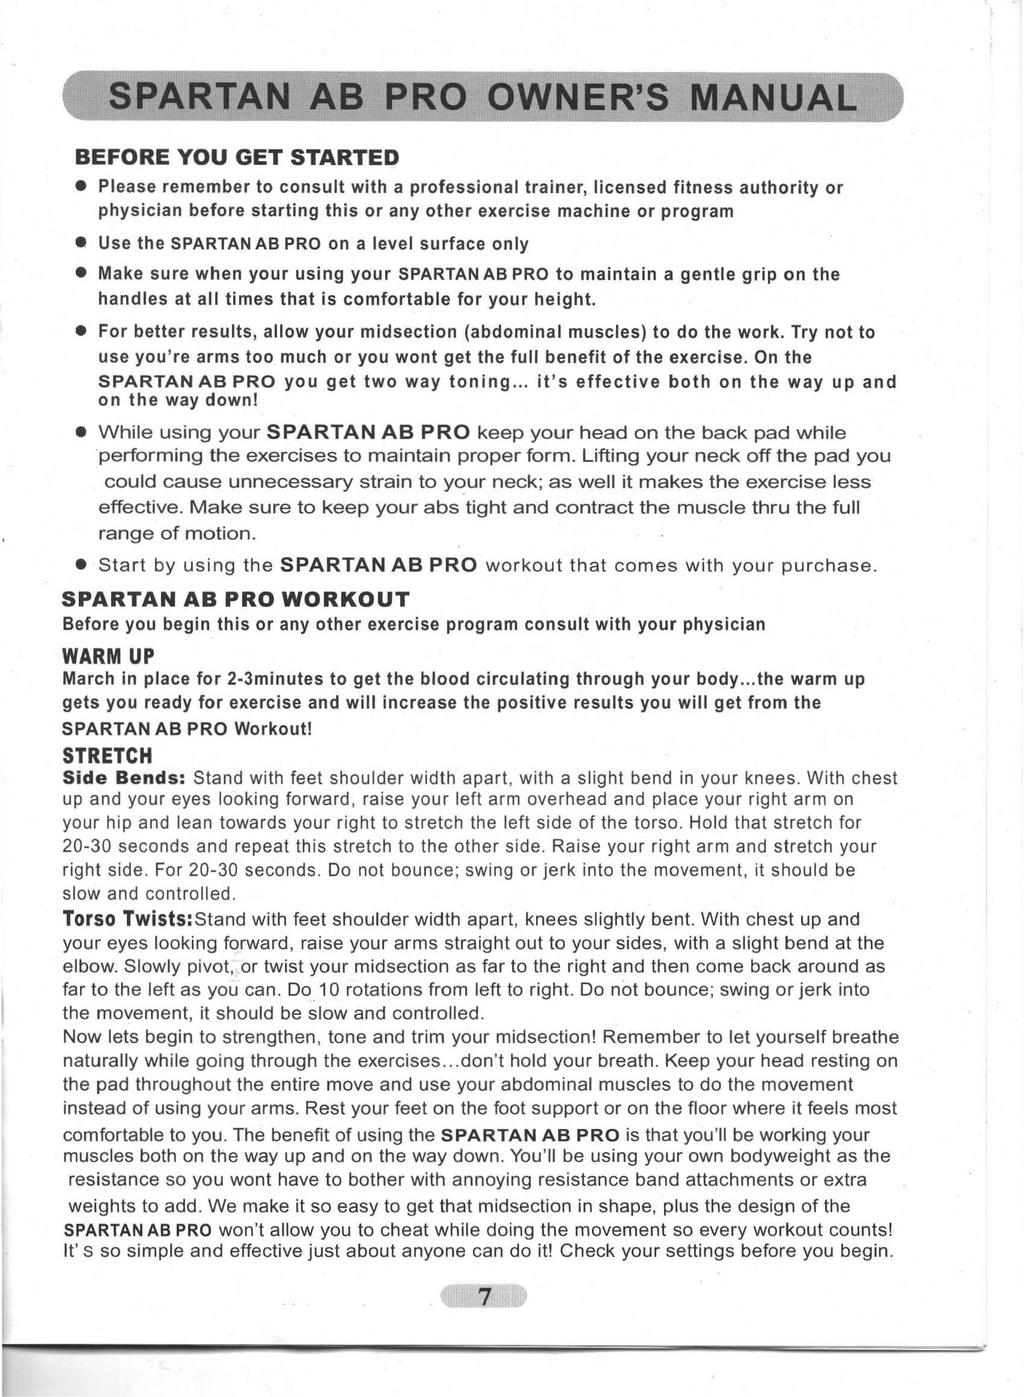 SPARTAN AB PRO OWNER'S MANUAL BEFORE YOU GET STARTED Please remember to consult with a professional trainer, licensed fitness authority or physician before starting this or any other exercise machine